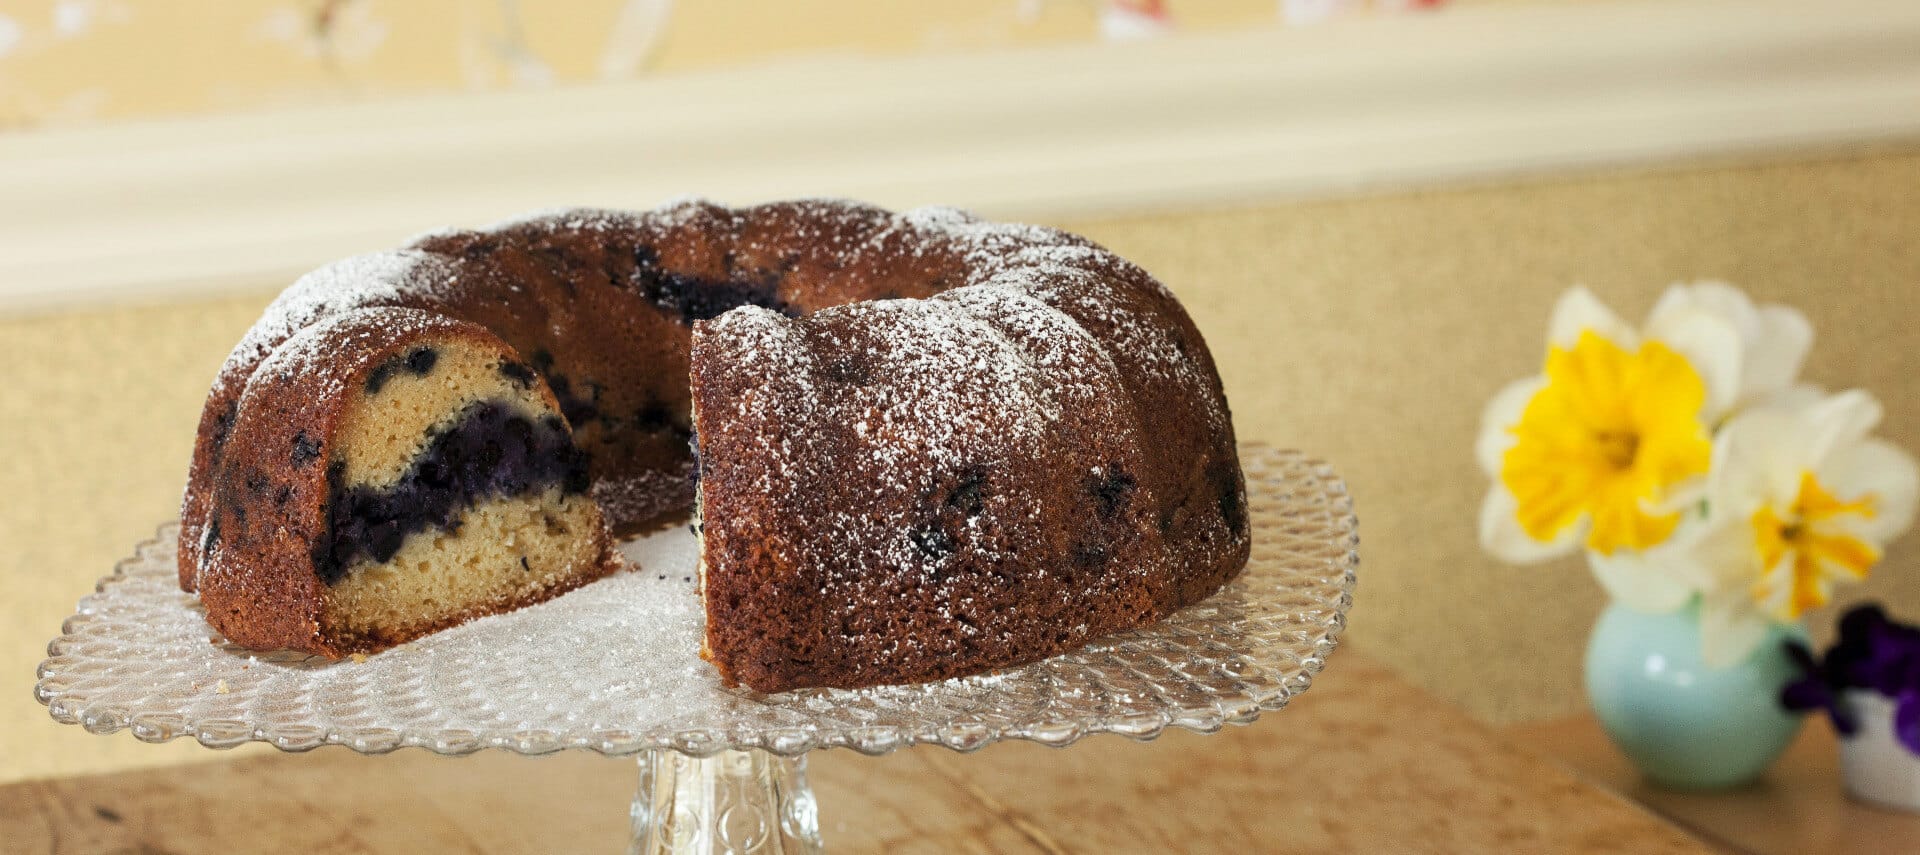 Blueberry bundt cake on a glass dish with a slice of cake and bowl of berries on a plate alongside.